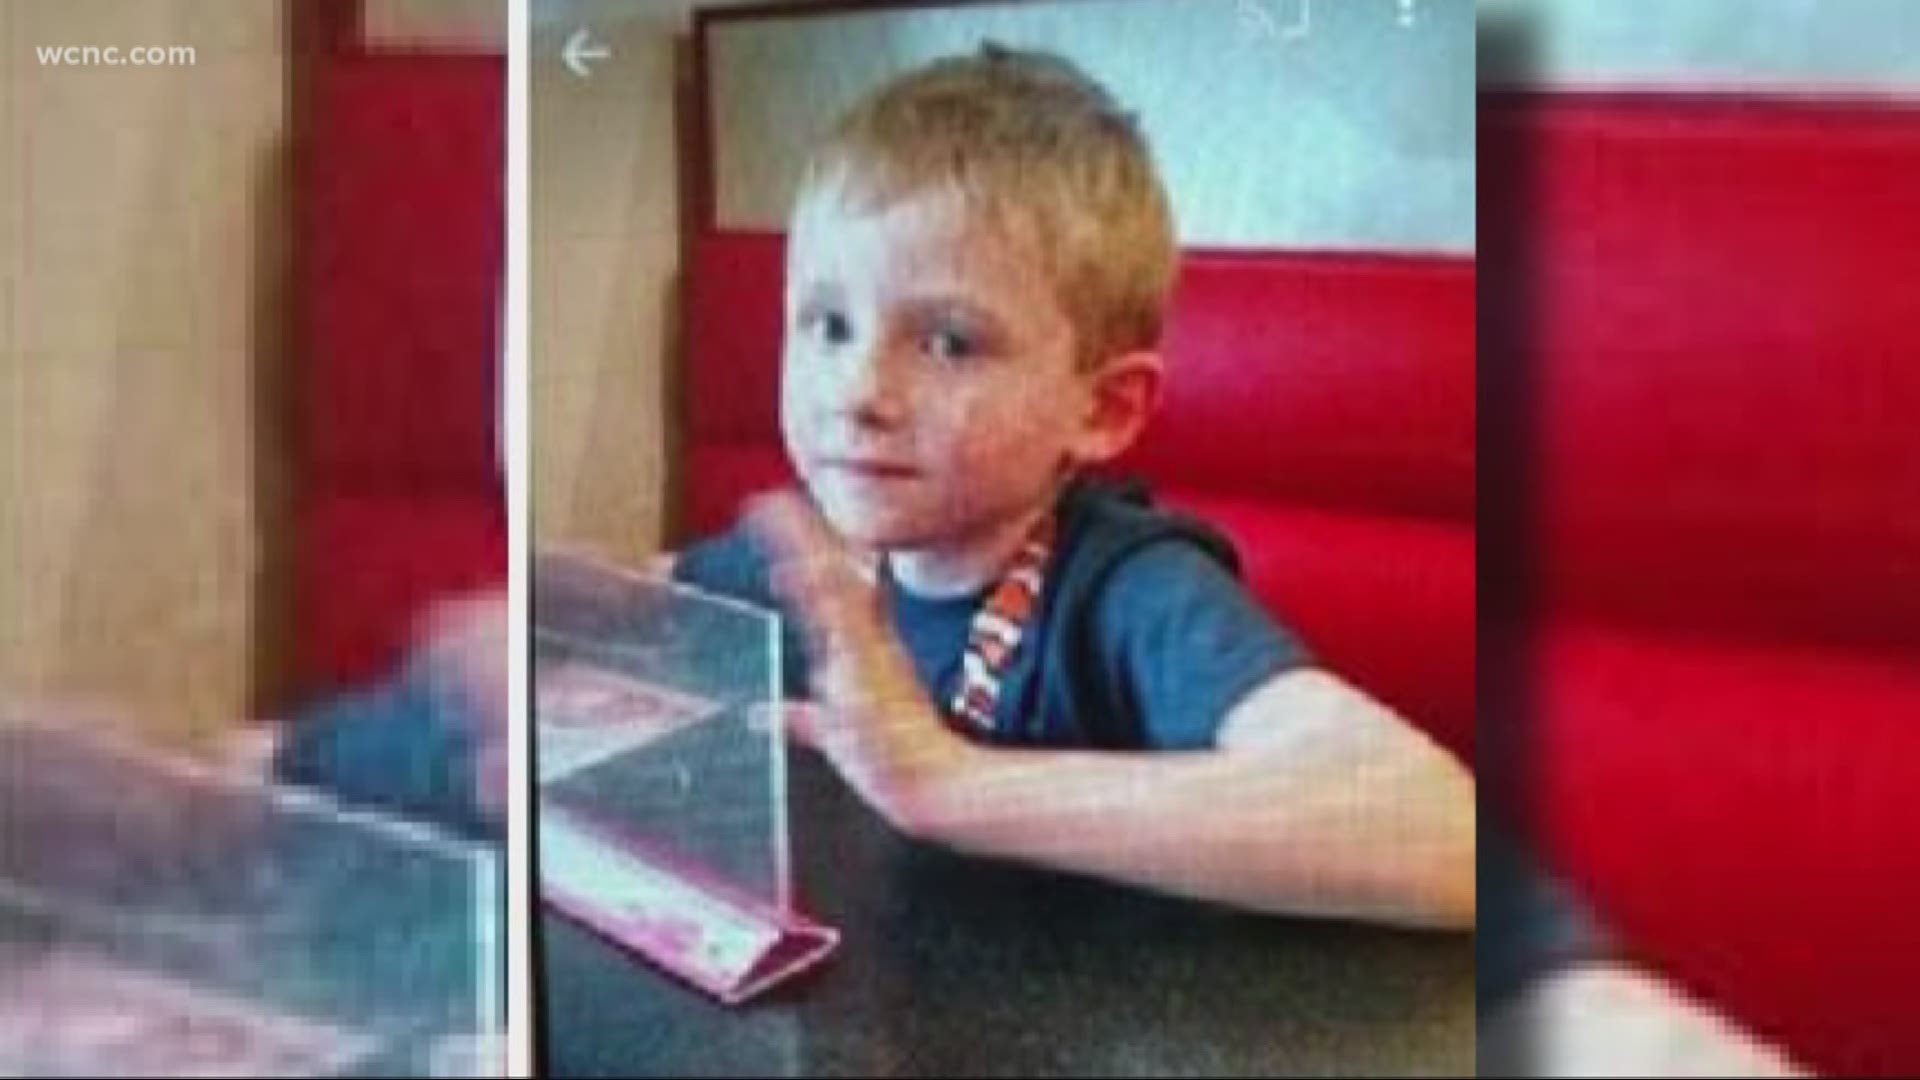 Authorities say about 180 people did what they could to find Maddox Ritch.